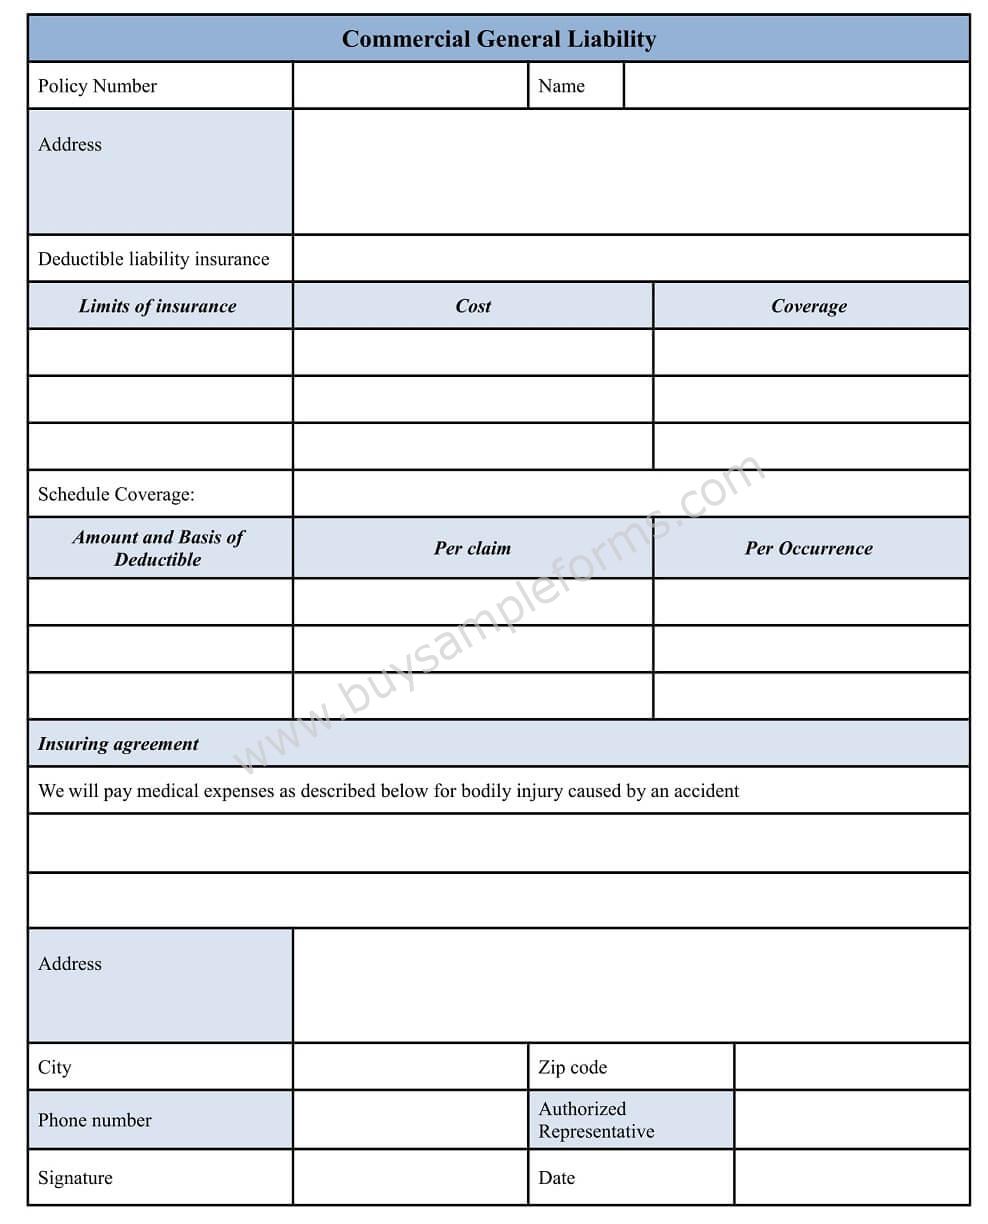 Download Commercial General Liability Form in Word Format